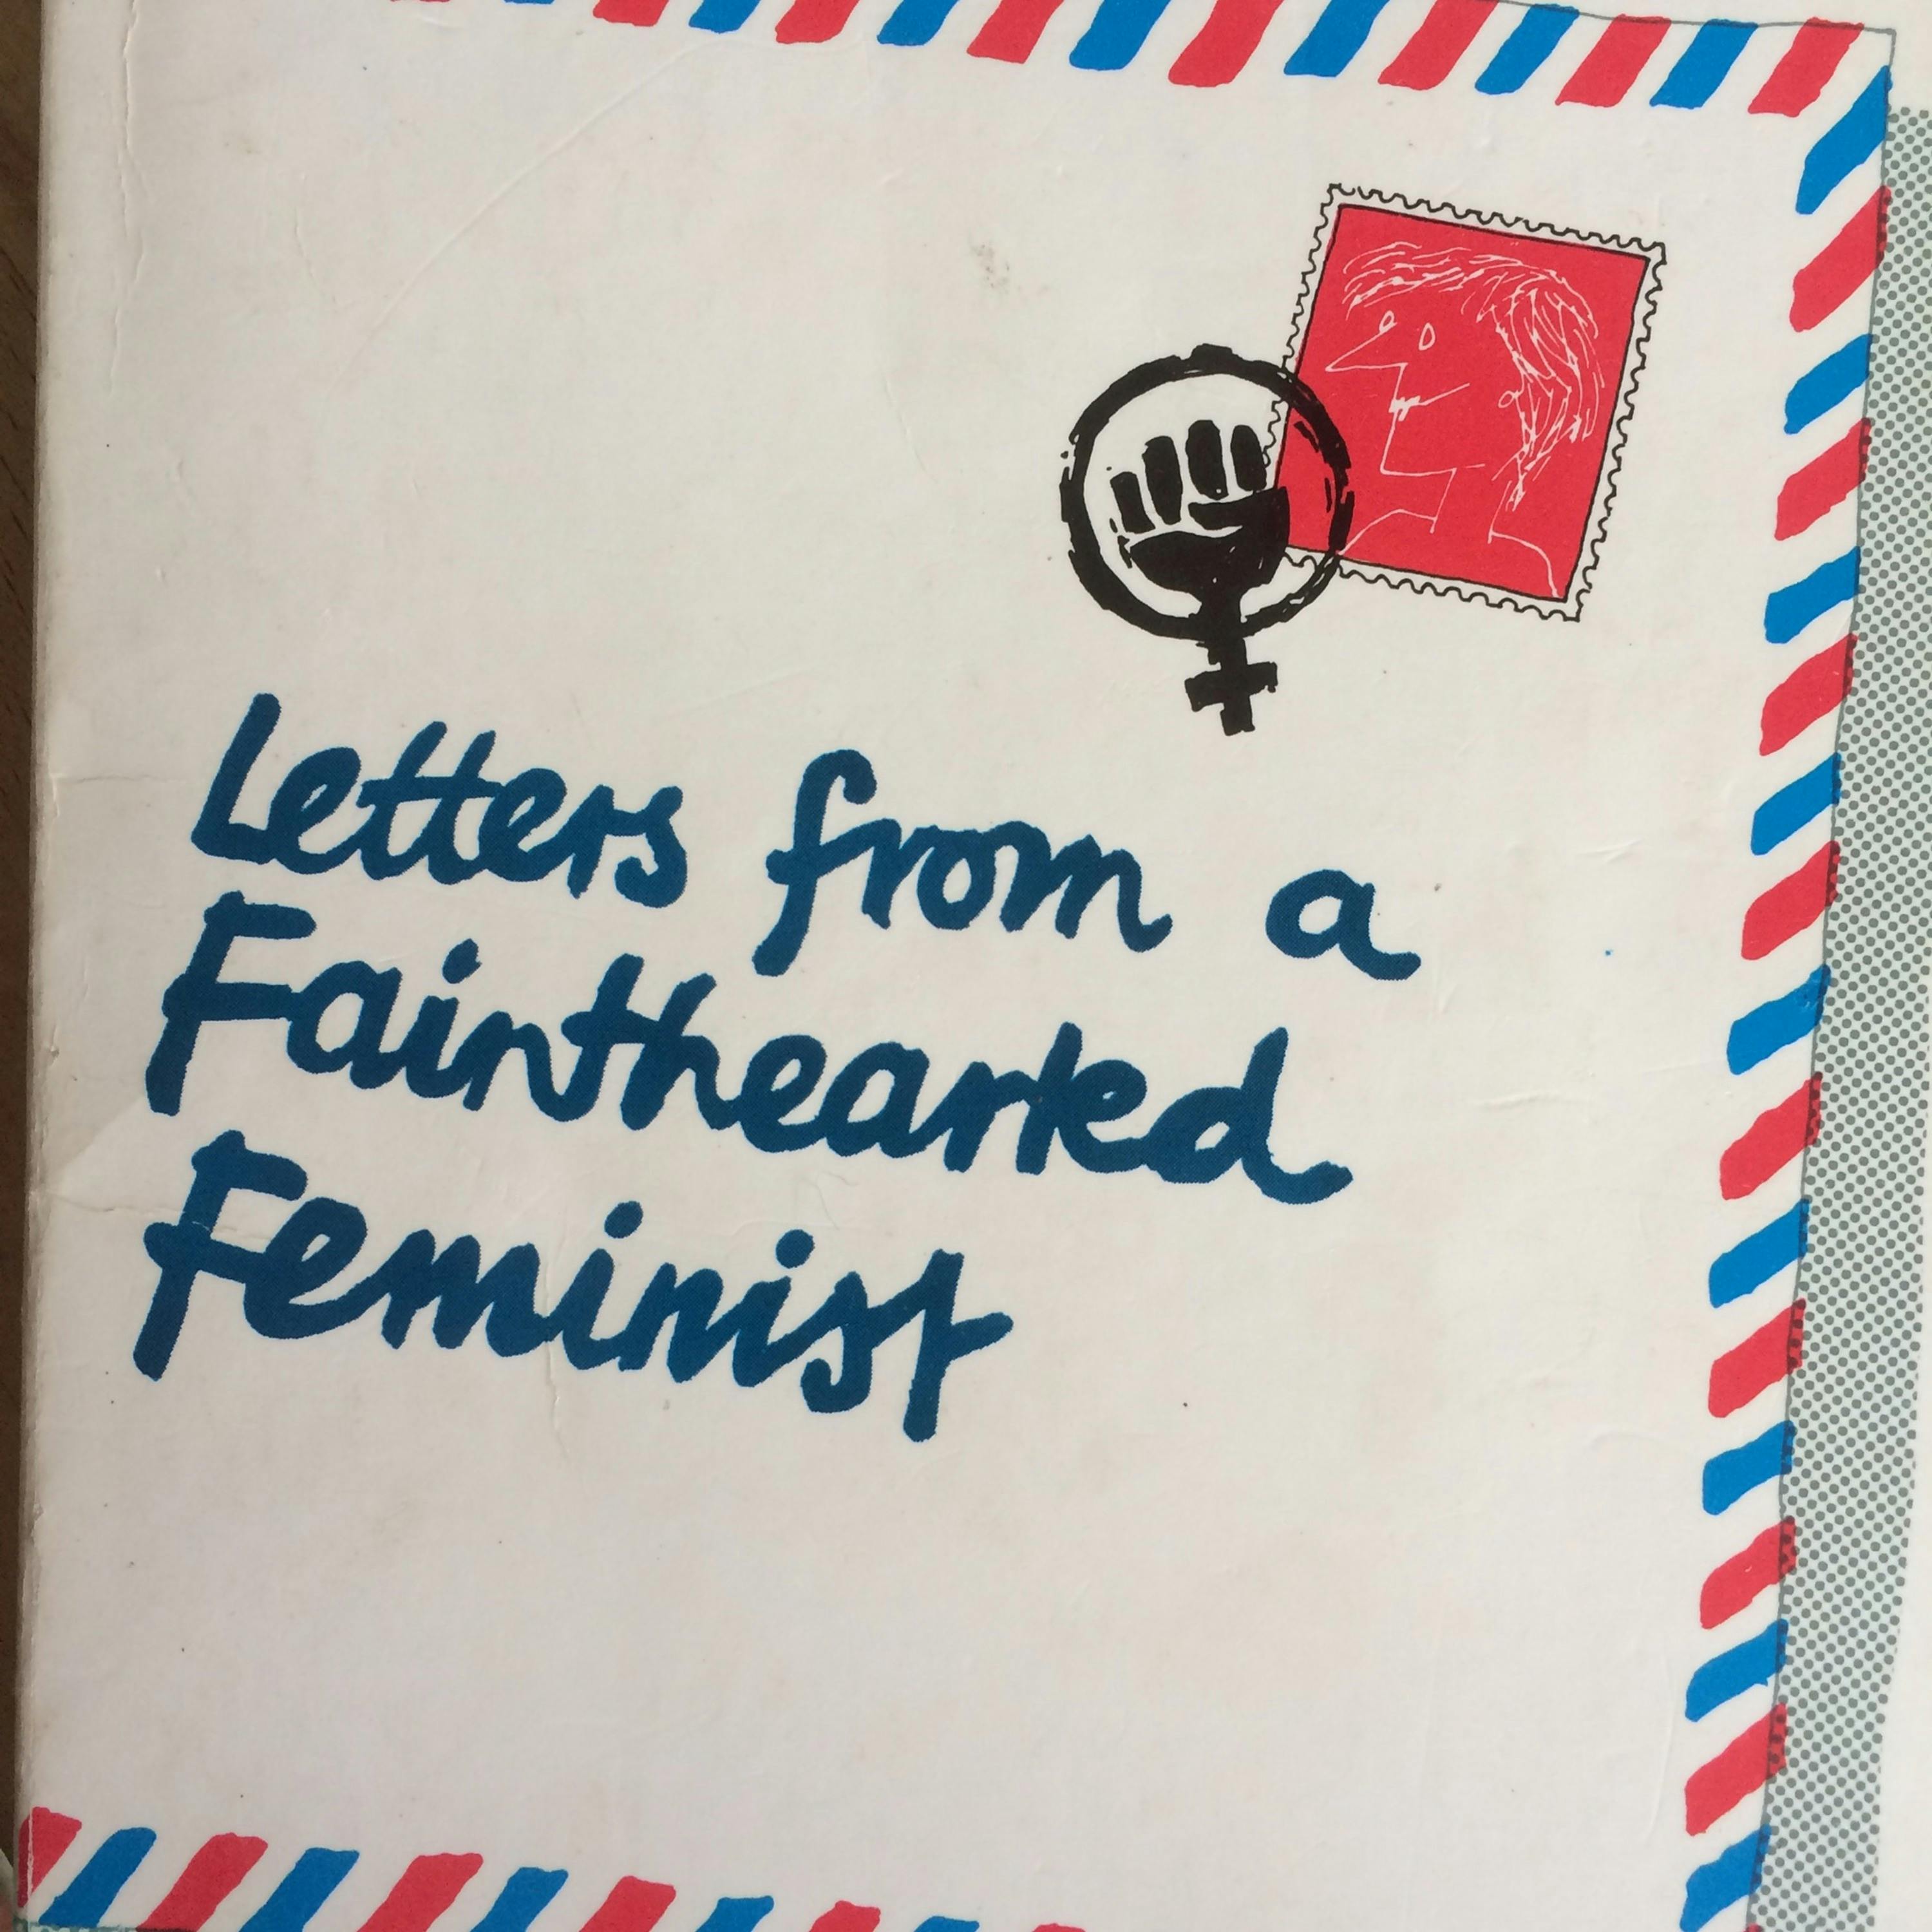 Letters from a Fainthearted Feminist by Jill Tweedie